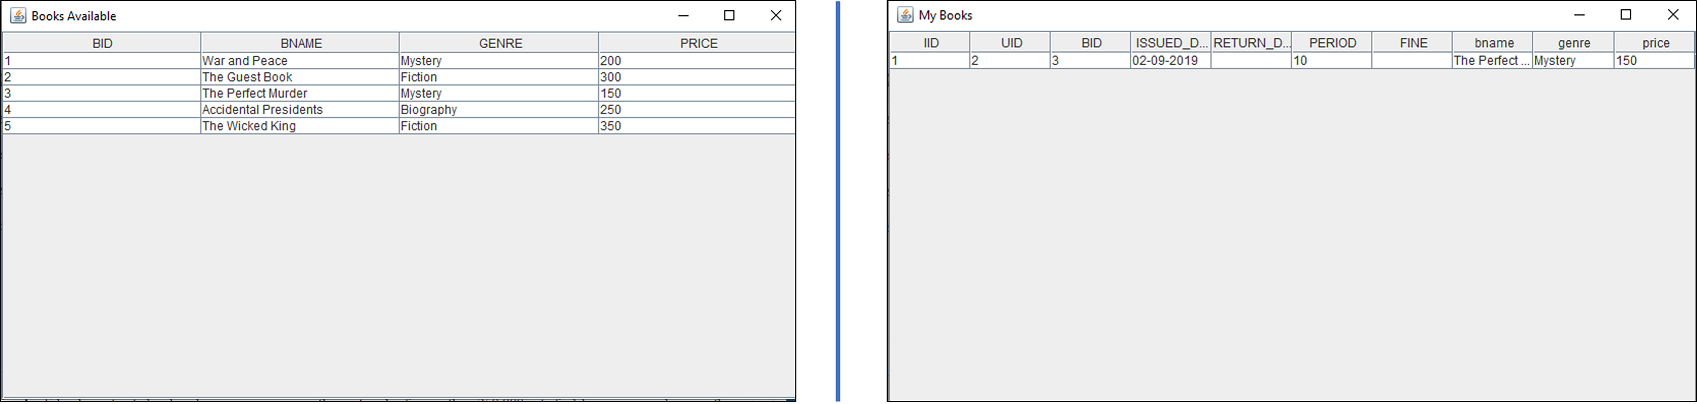 Books - Library Management System Project in Java - Edureka